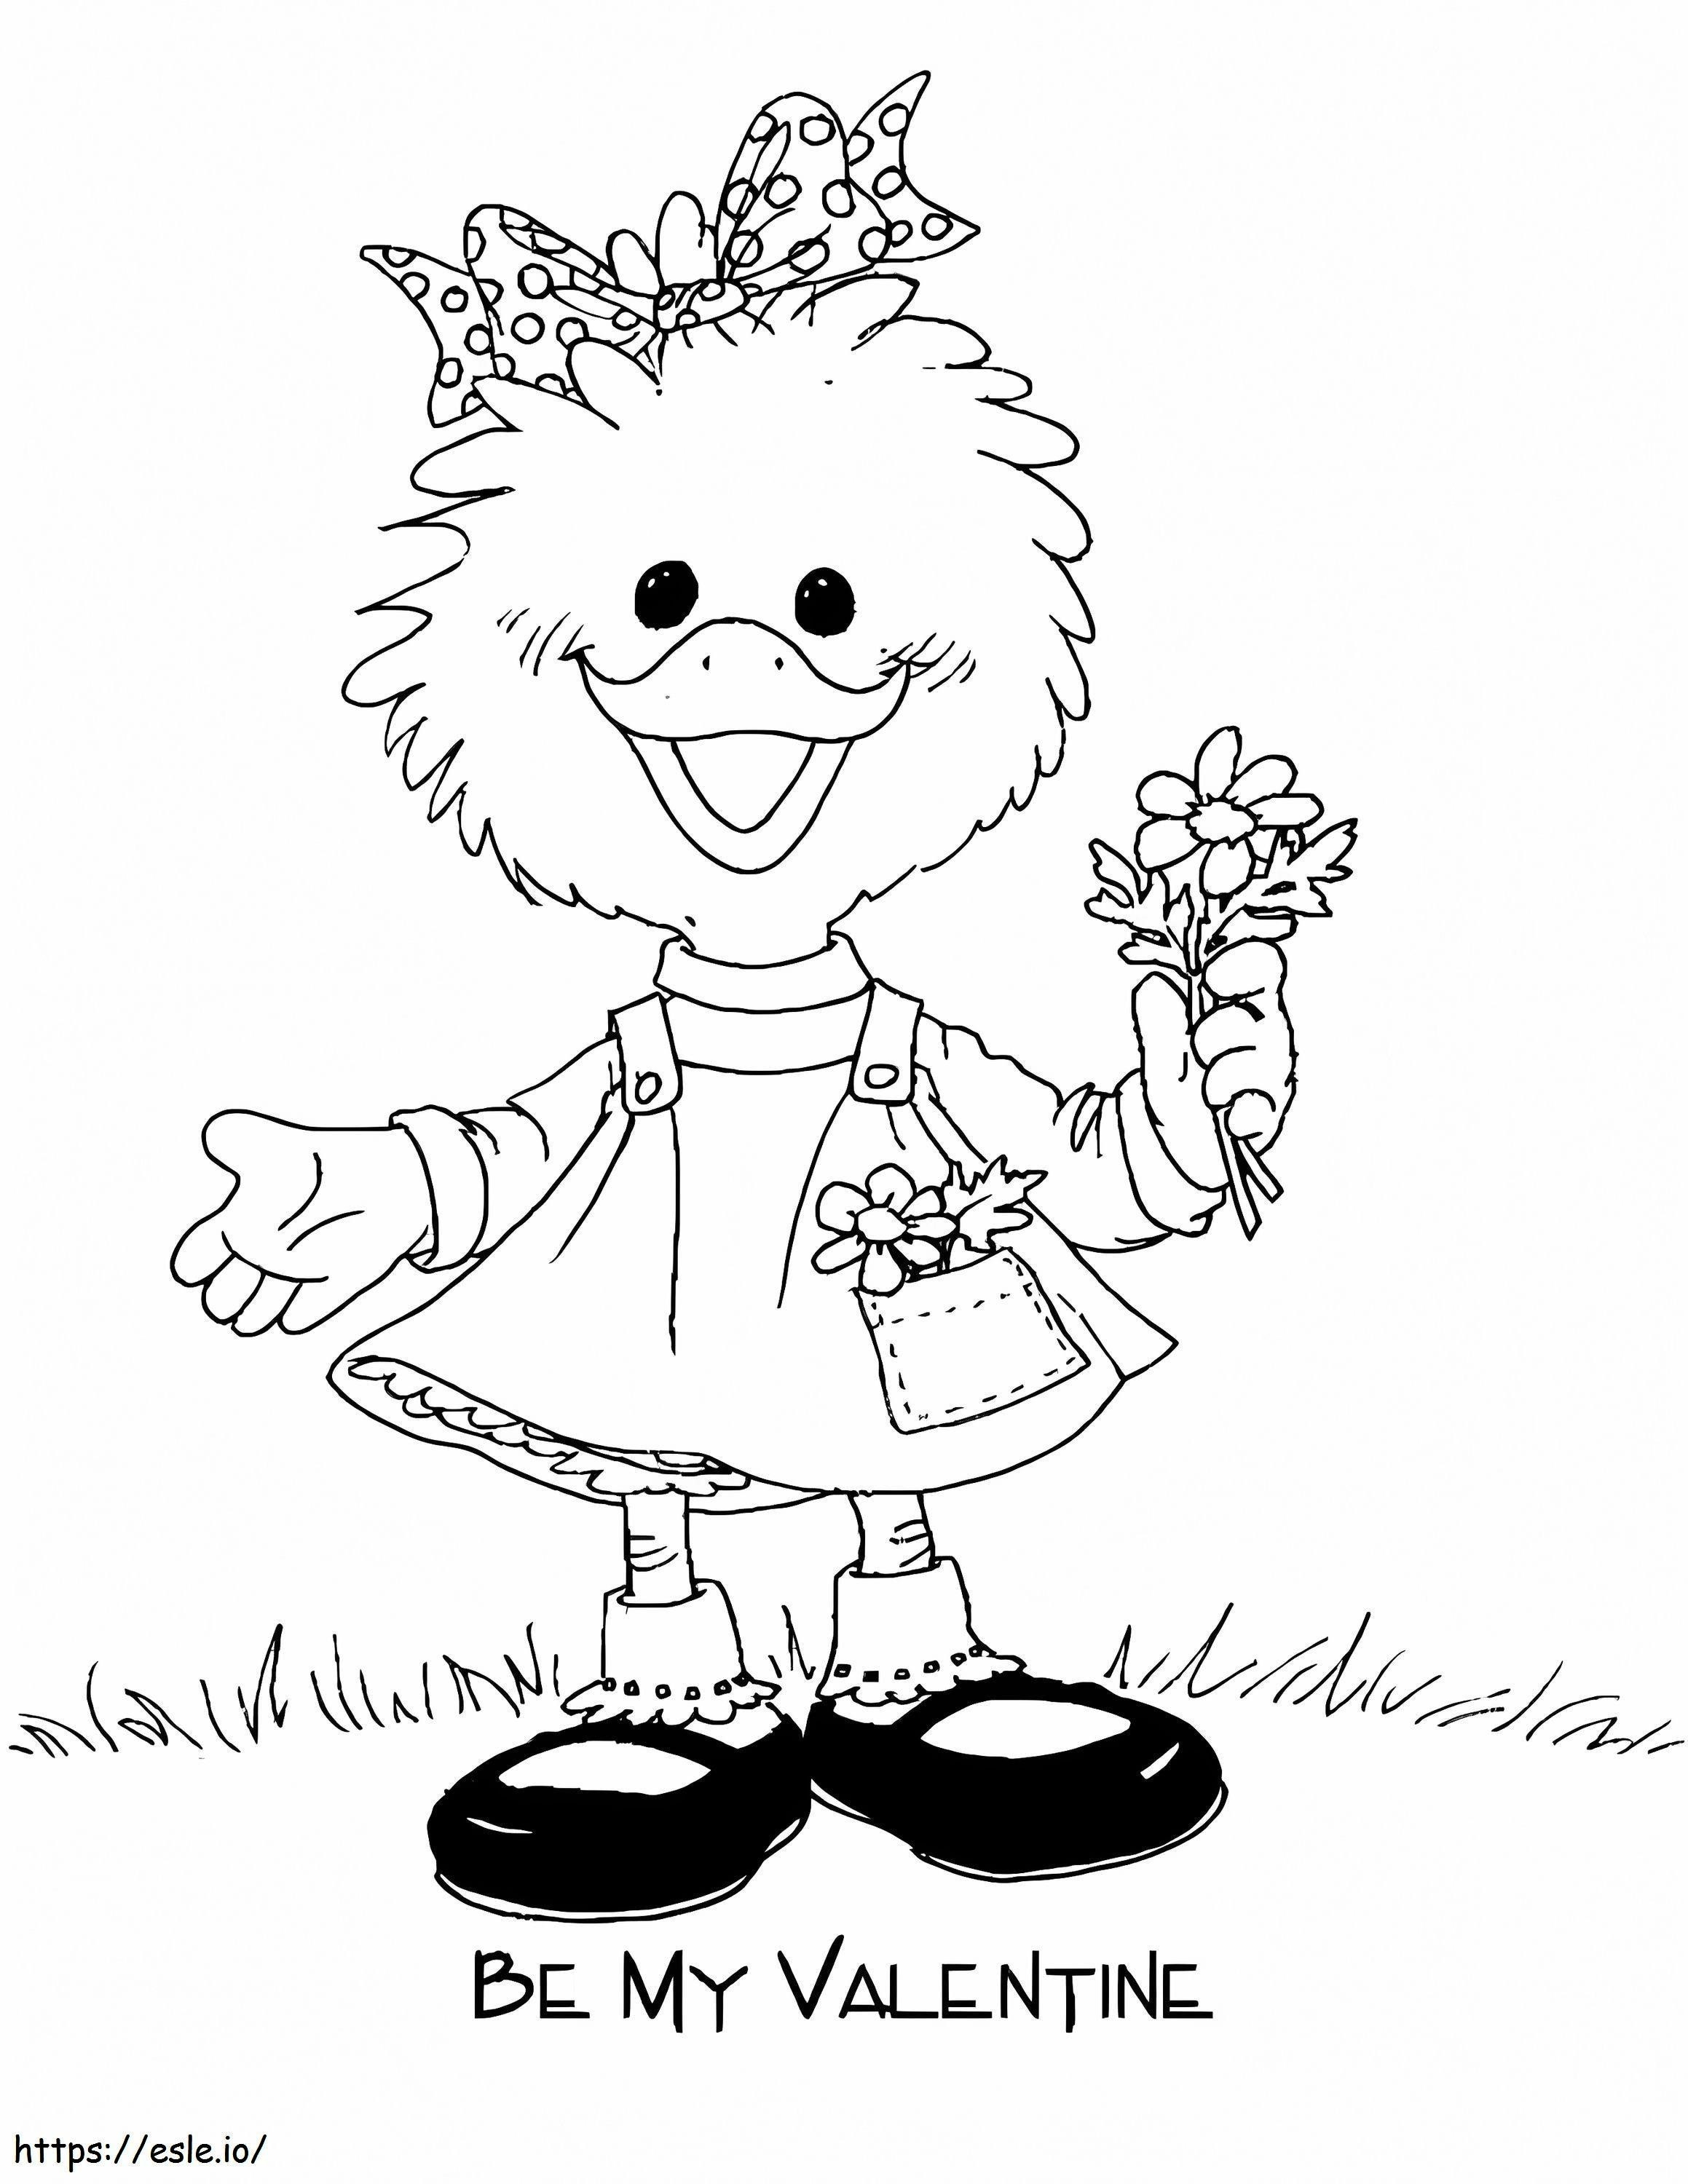 Suzy Ducks From Suzy'S Zoo coloring page